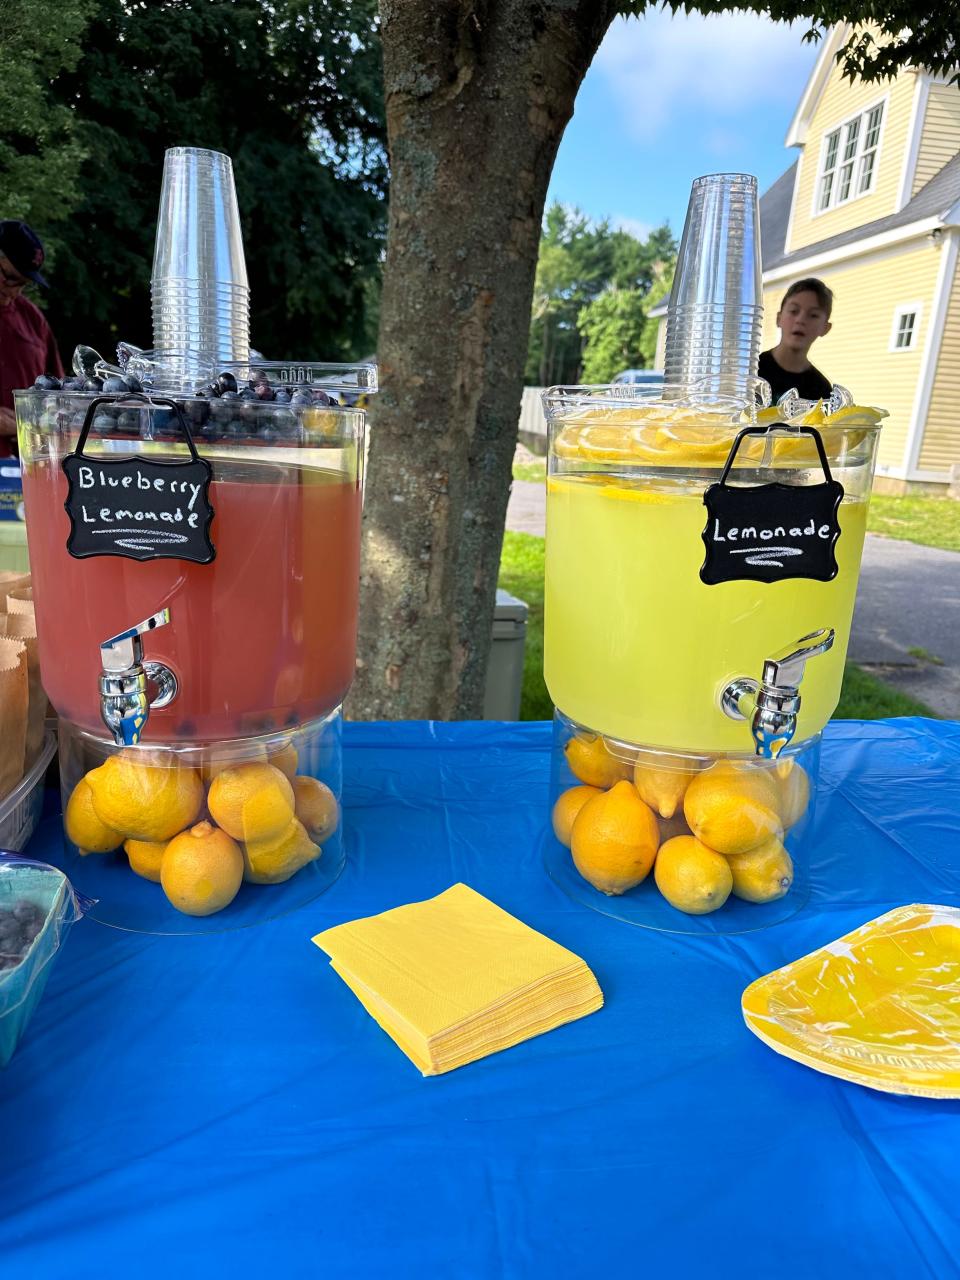 Drink options of blueberry lemonade straight from Russell's blueberry bush growing in their yard, and regular lemonade. The family hosted the Rockland Trust Bank and Tommy's Place second annual lemonade stand to raise money for families affected by childhood cancer.